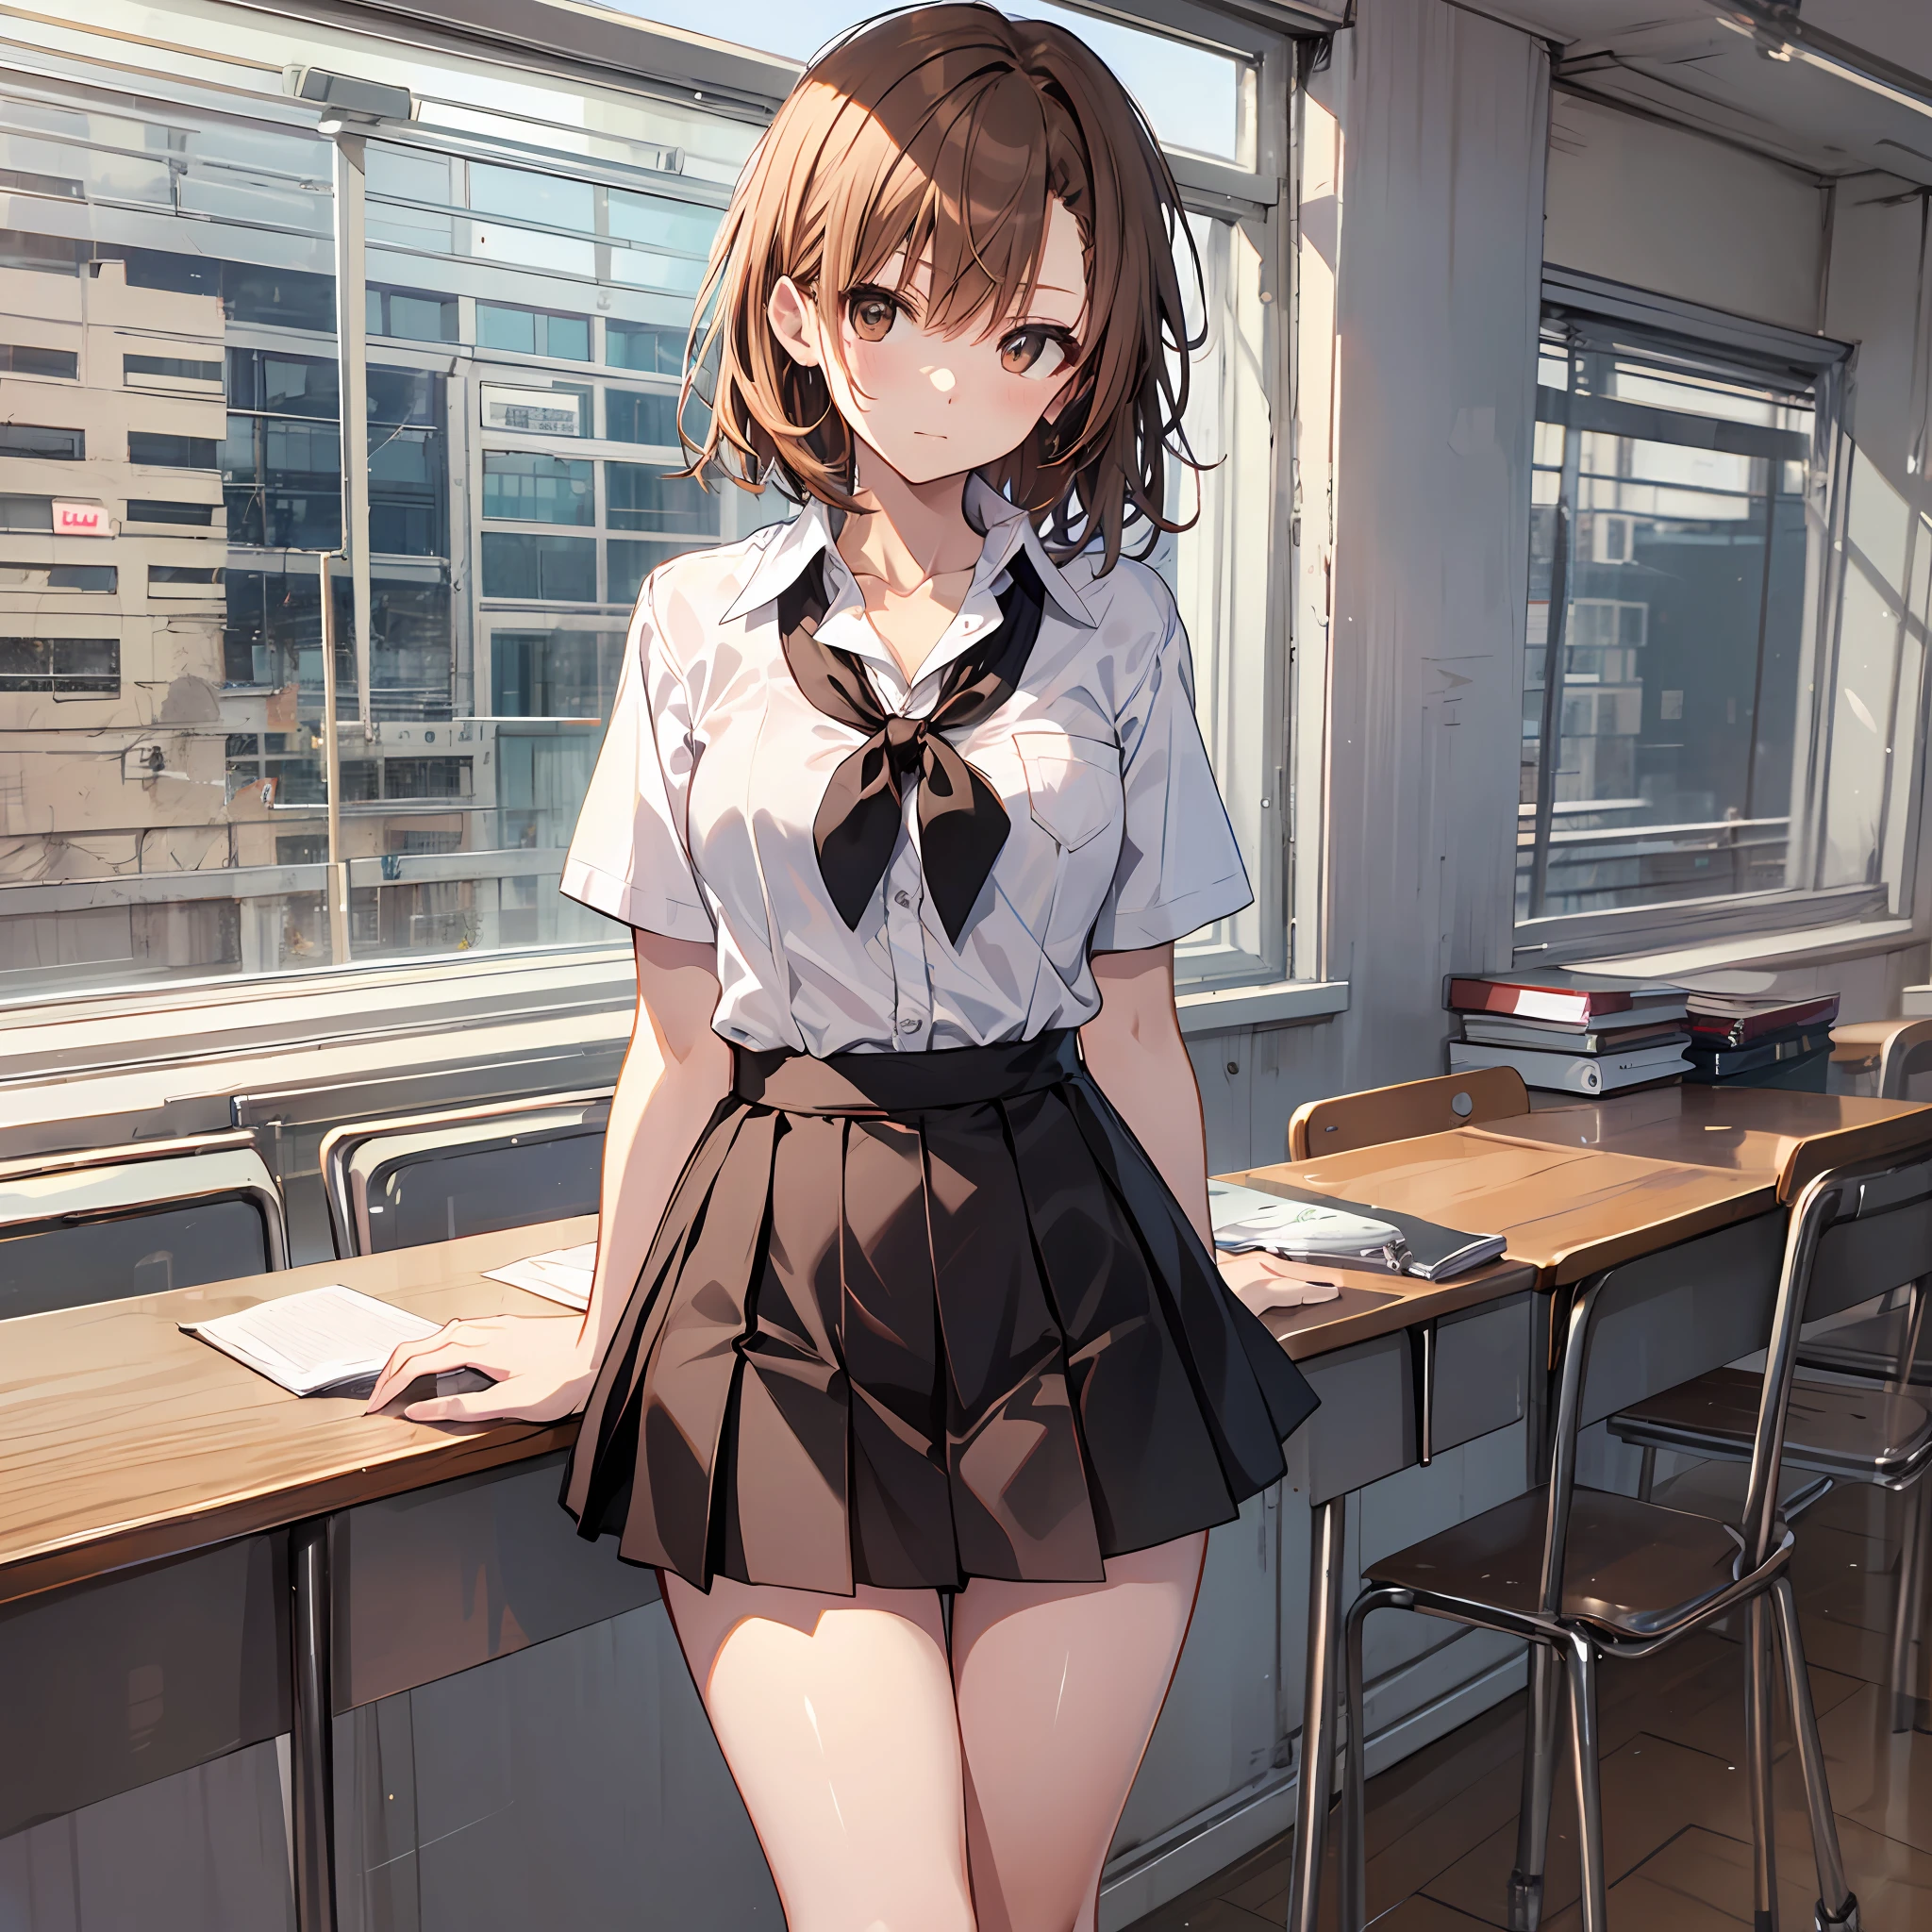 make, best qualiy, Misaka_mikoto, brown eyess, Short_hair, Small_Breast, looking at the viewers, solo, Closed_Mouth, collars_Shirt, School_uniform, shirts, whited_Shirt, , class room　full bodied　miniskirts　Cool look